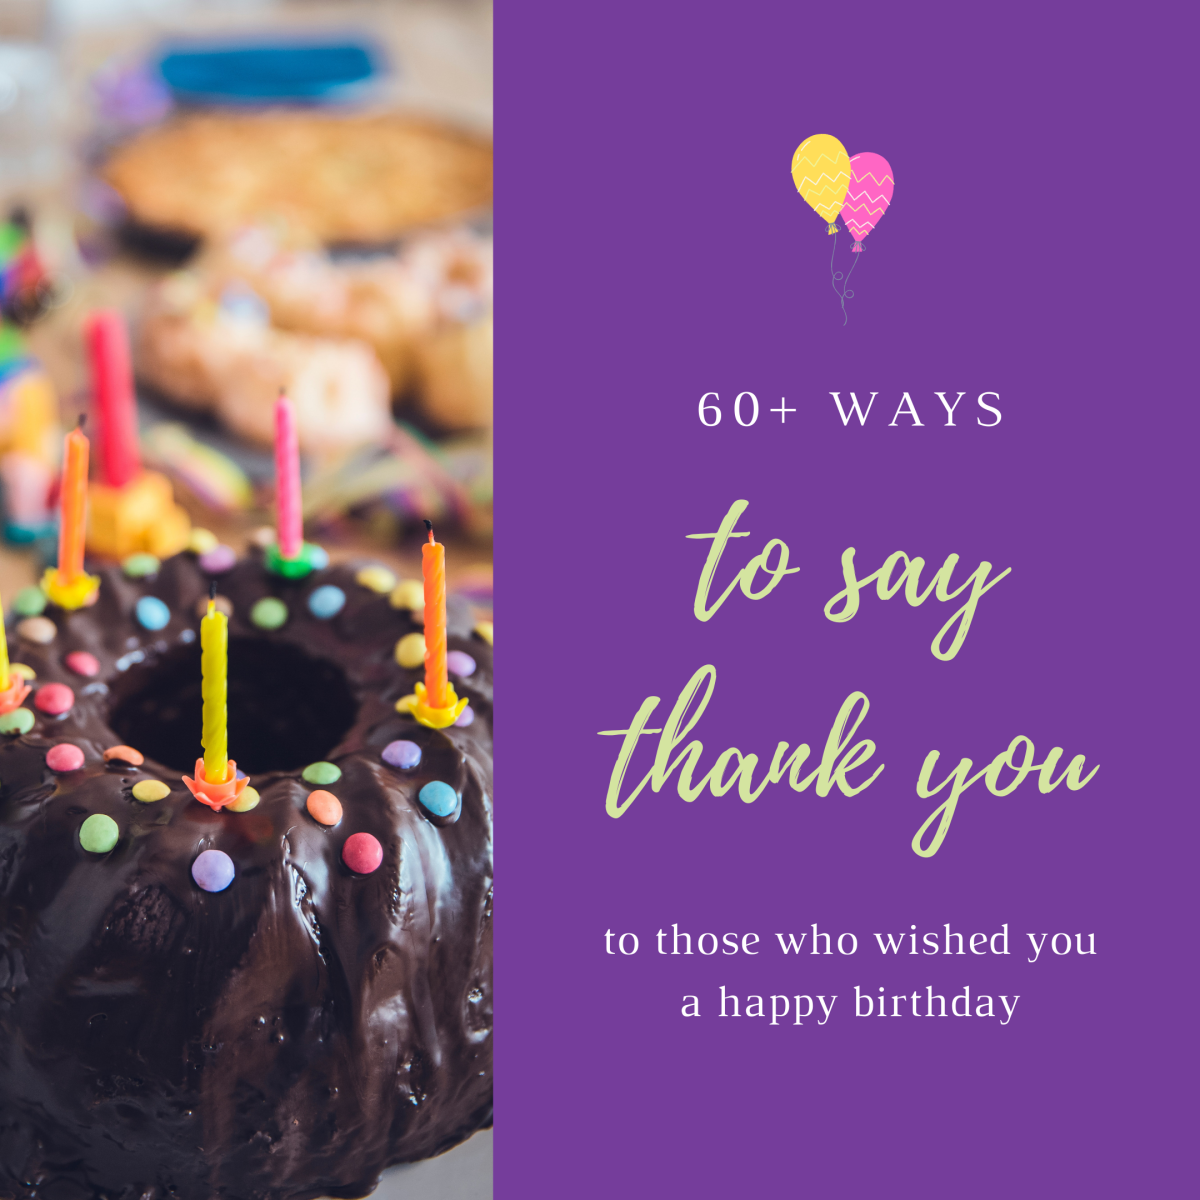 how-to-say-thanks-for-birthday-wishes-printable-form-templates-and